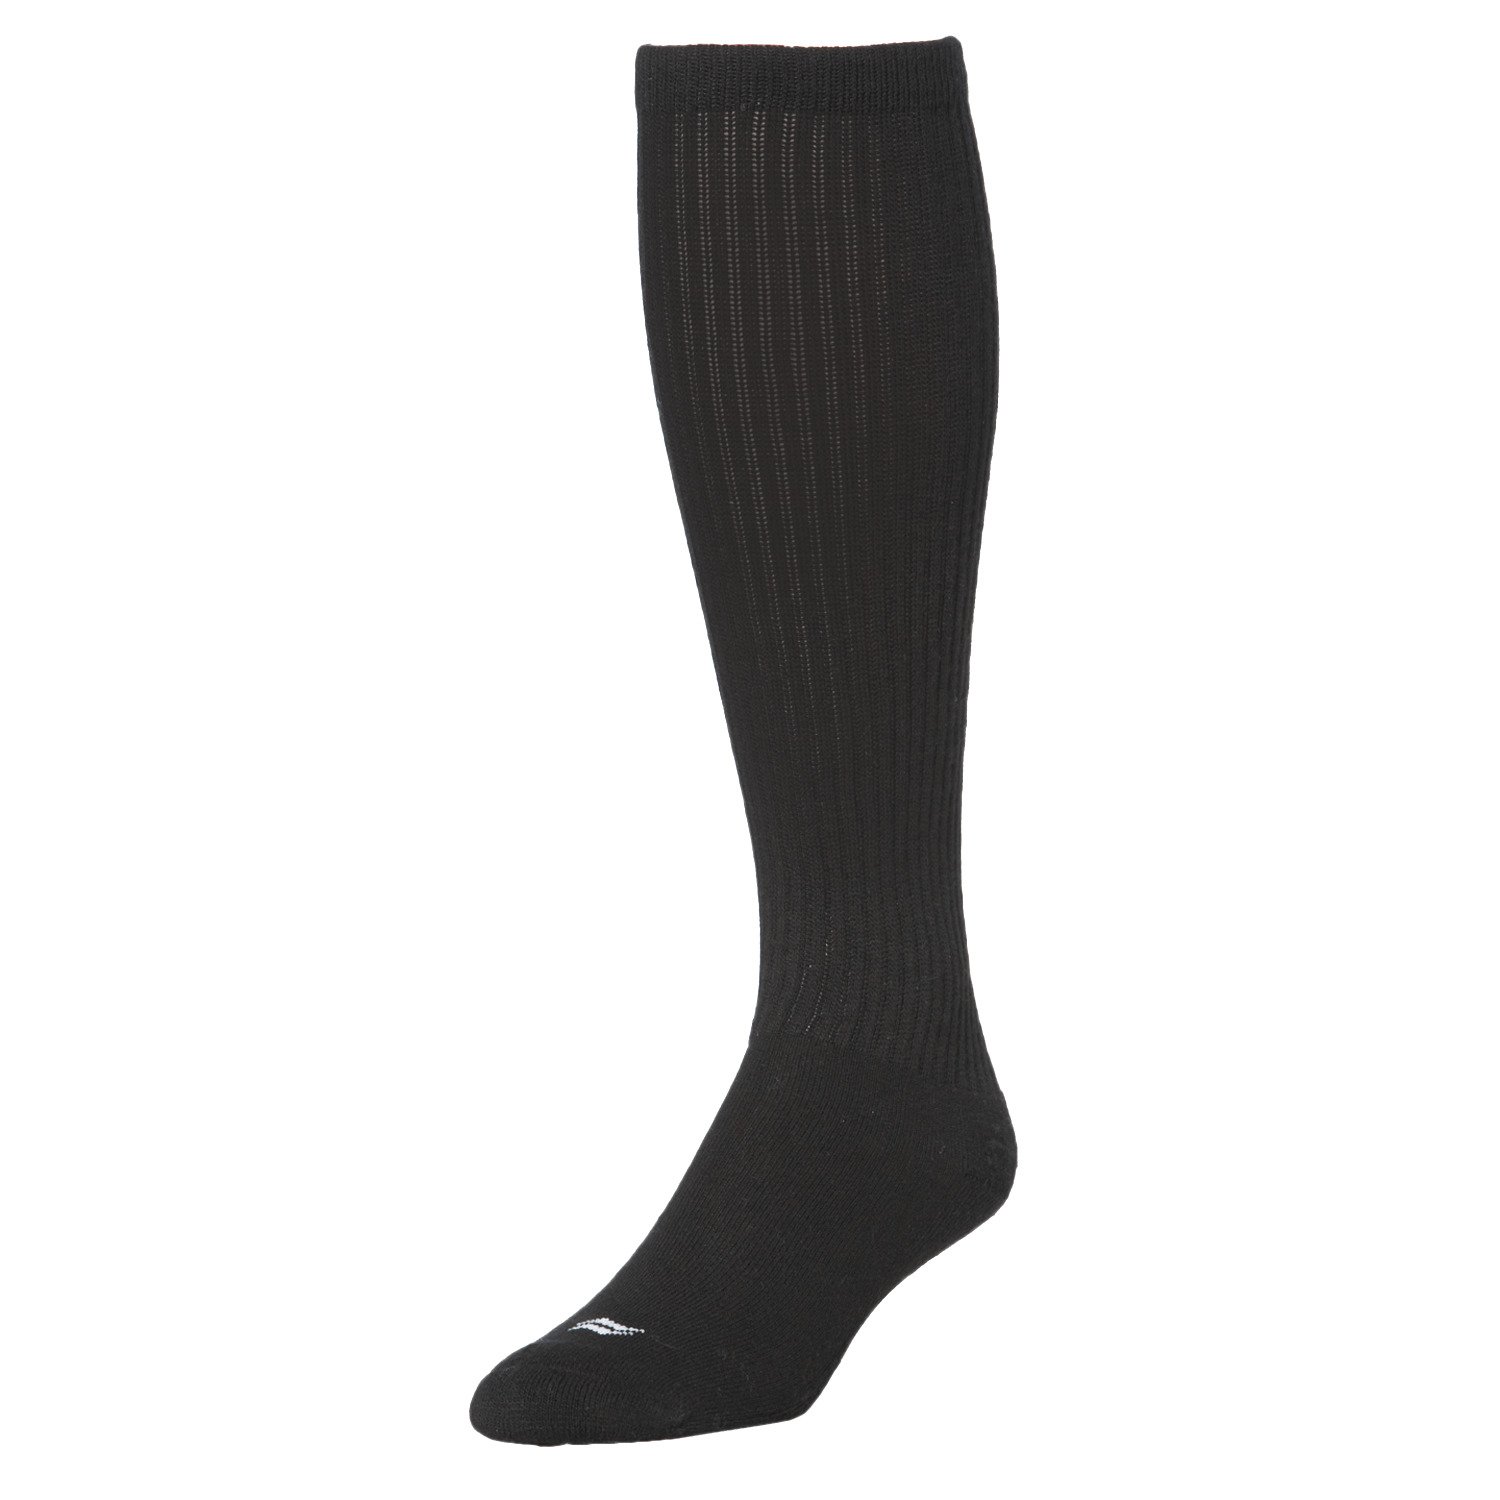 Sof Sole Team Performance Football Socks Large                                                                                   - view number 1 selected